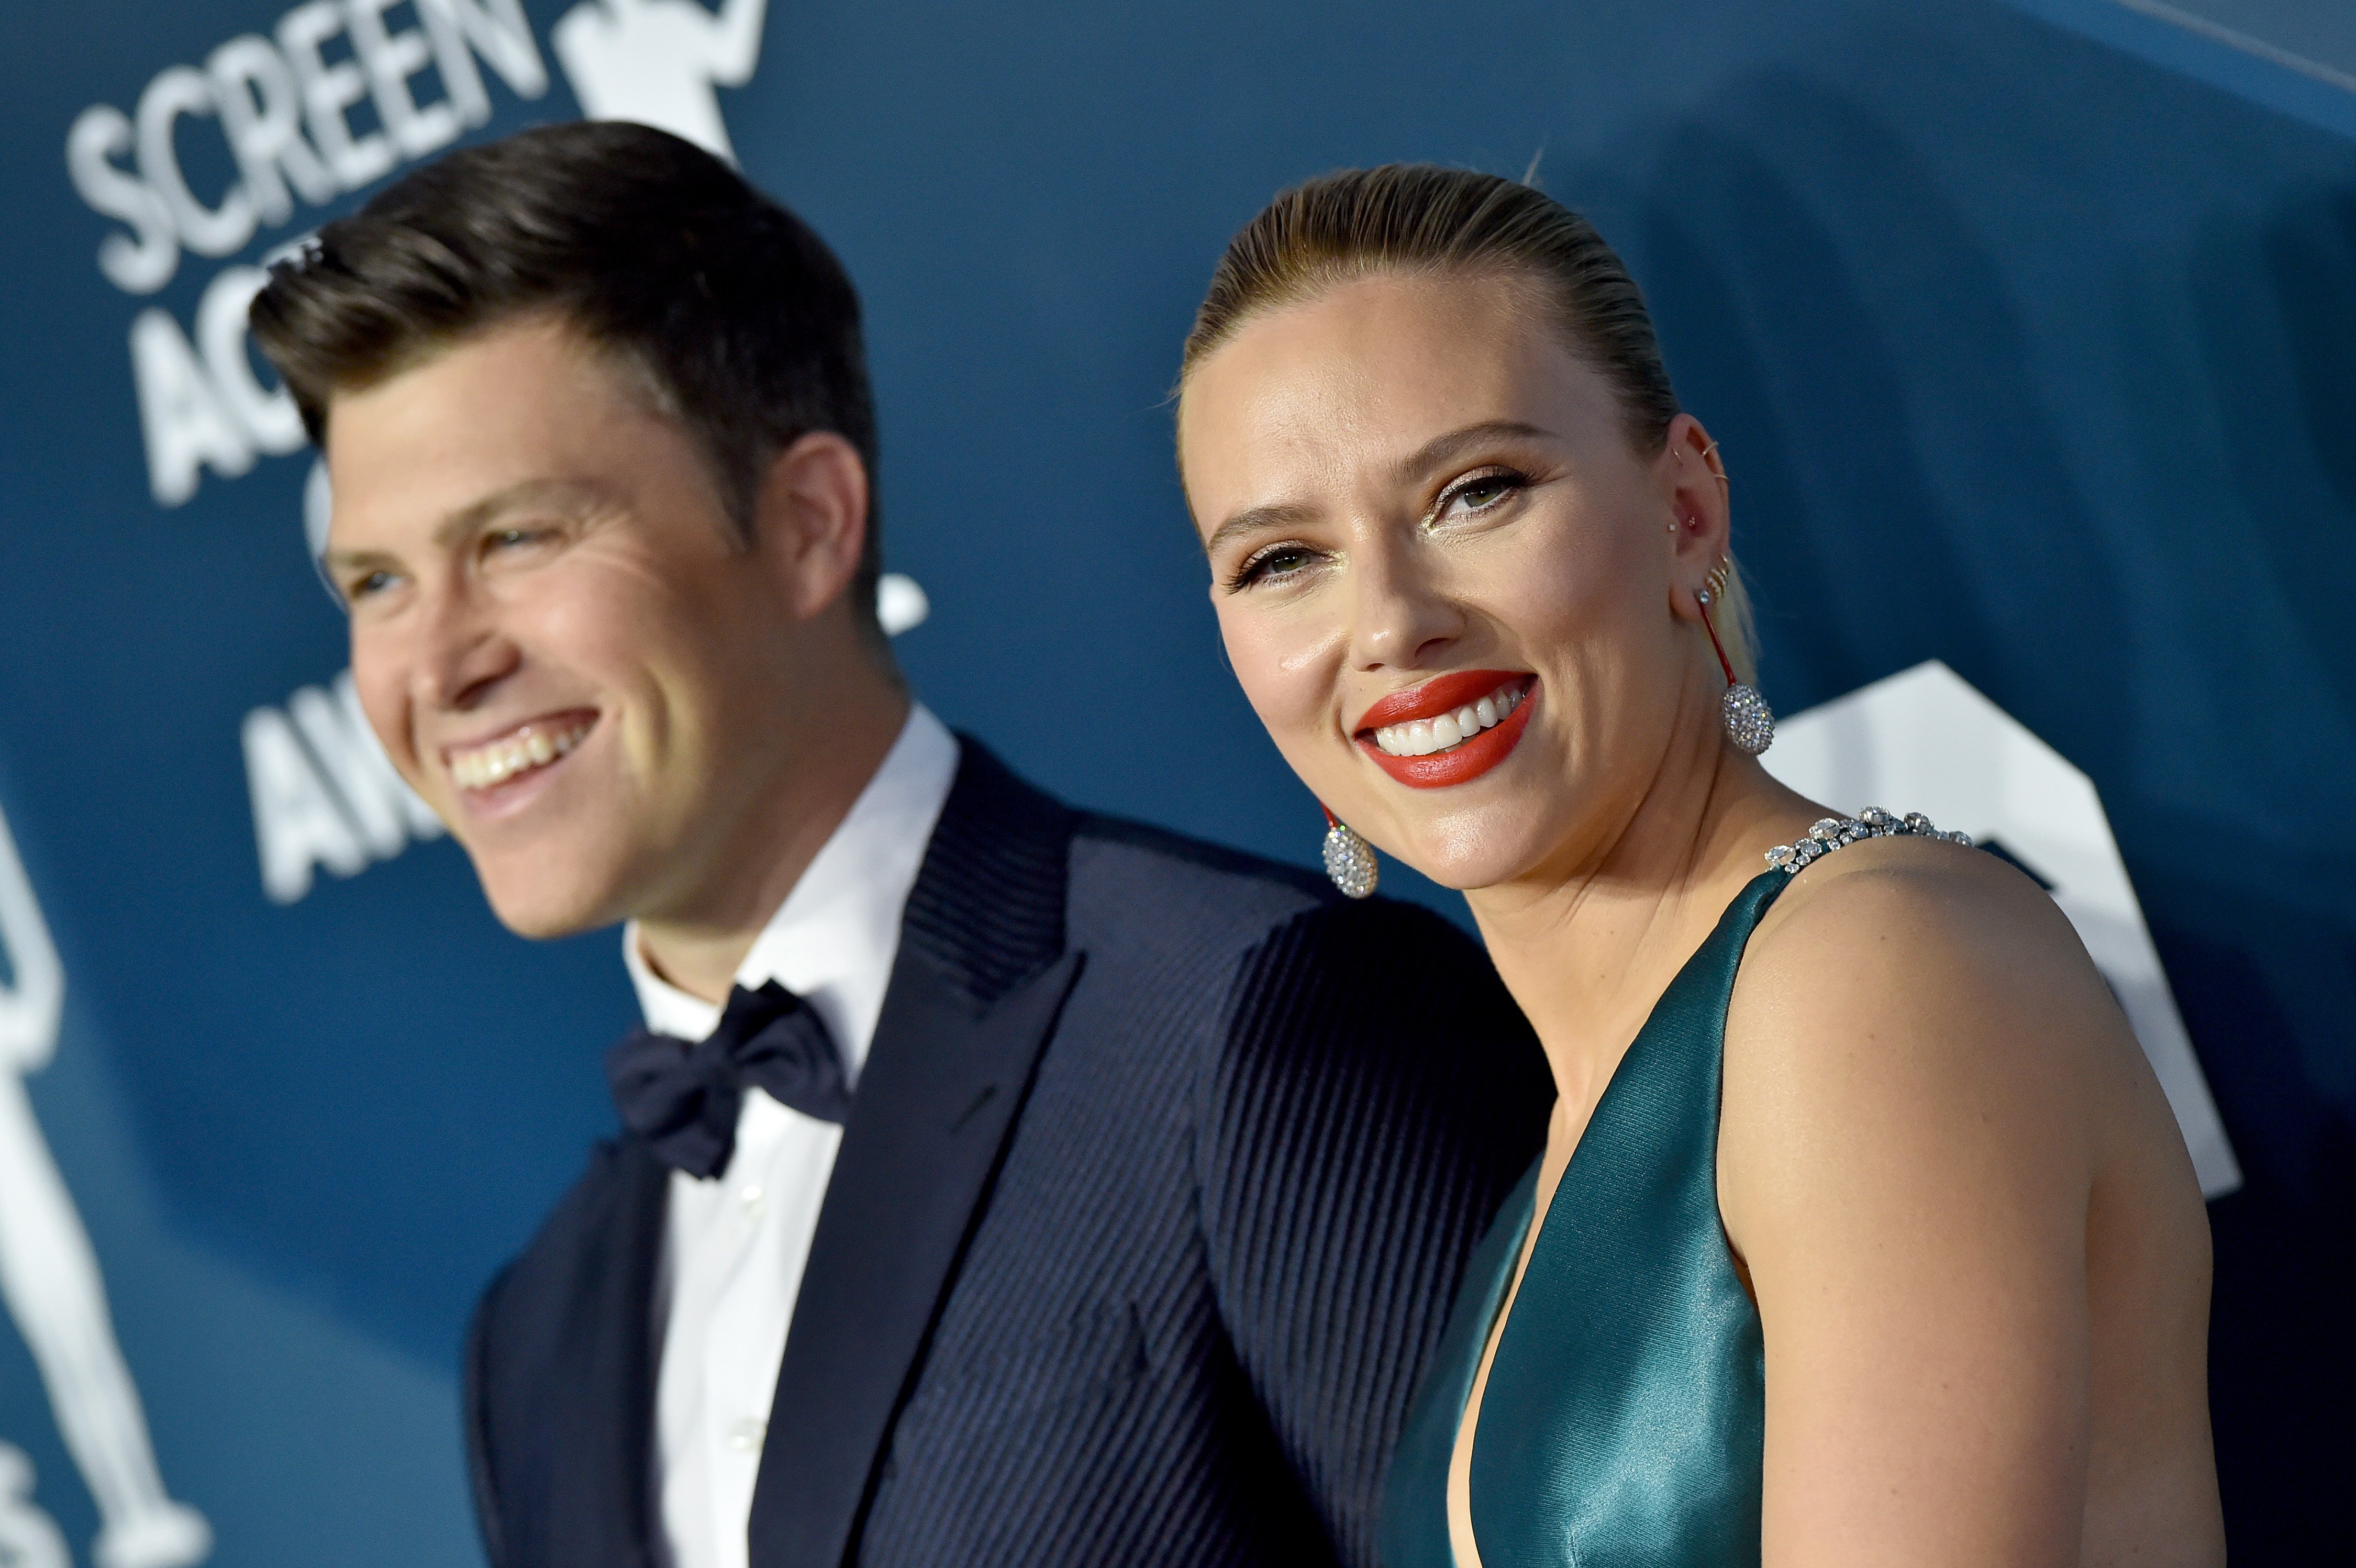 Comedian Colin Jost and Scarlett Johansson attend the 26th Annual Screen Actors Guild Awards at The Shrine Auditorium on January 19, 2020 in Los Angeles, California | Photo: Getty Images